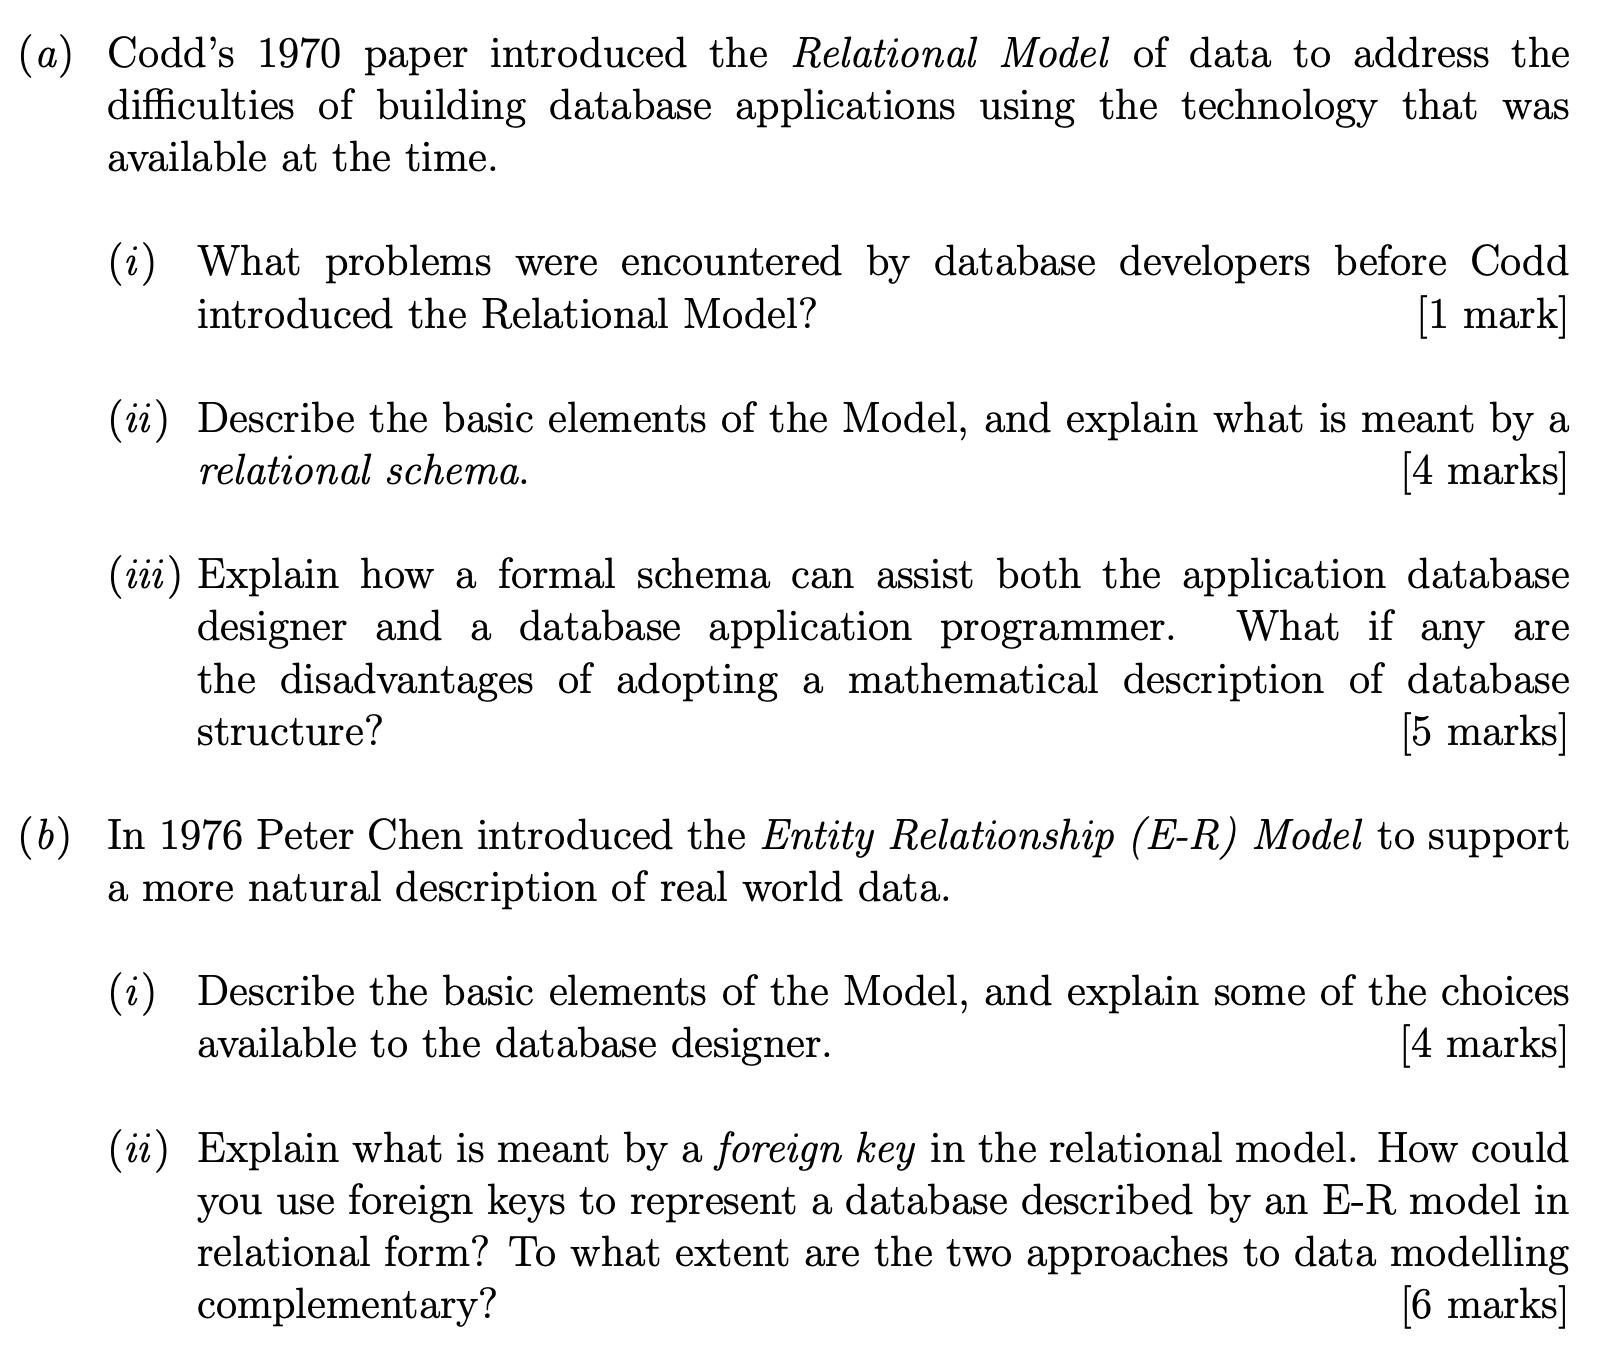 (a) Codd's 1970 paper introduced the Relational Model of data to address the difficulties of building